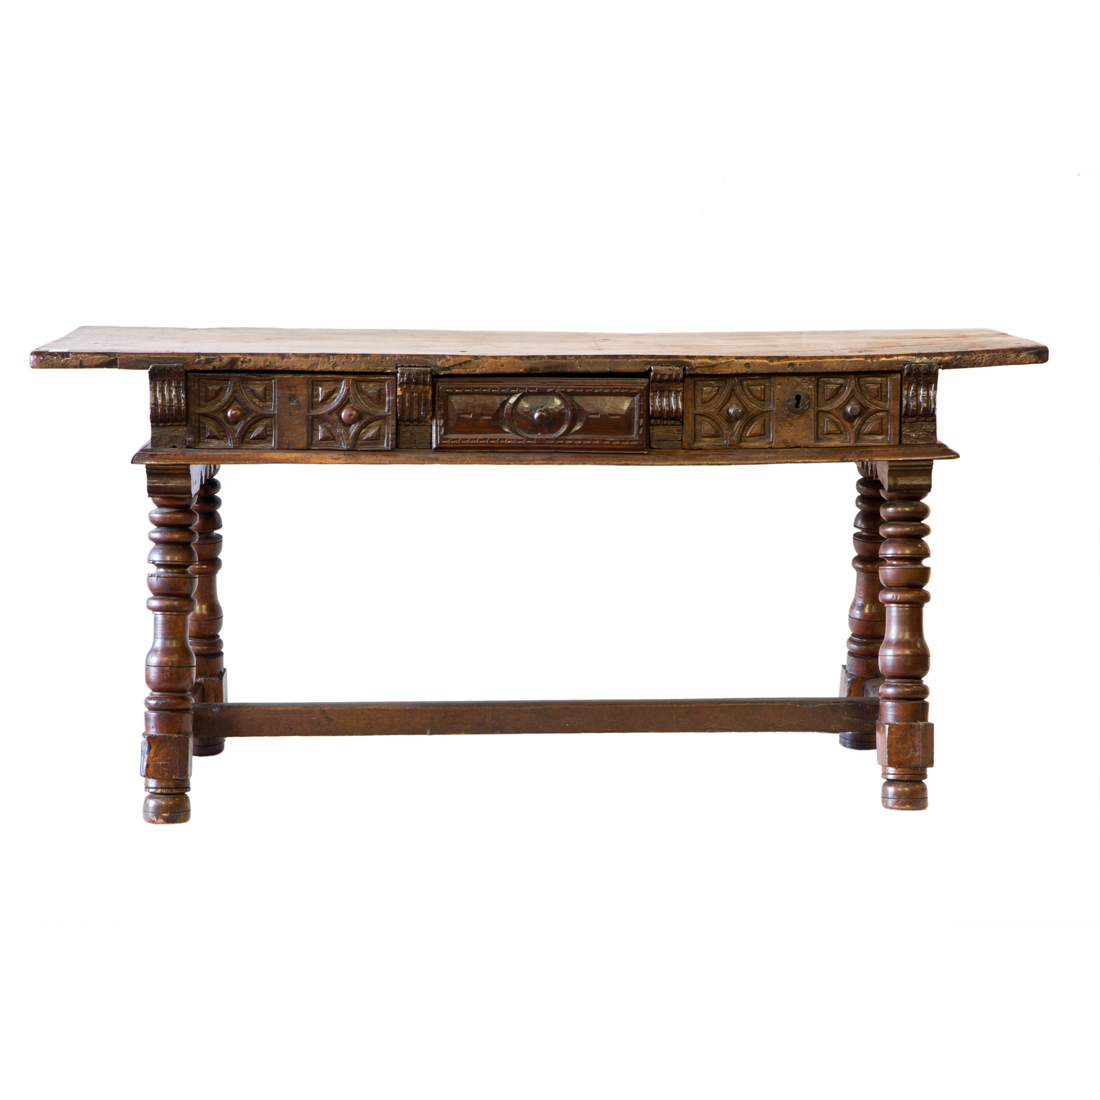 A CONTINENTAL CARVED WORK TABLE 3a2b8d